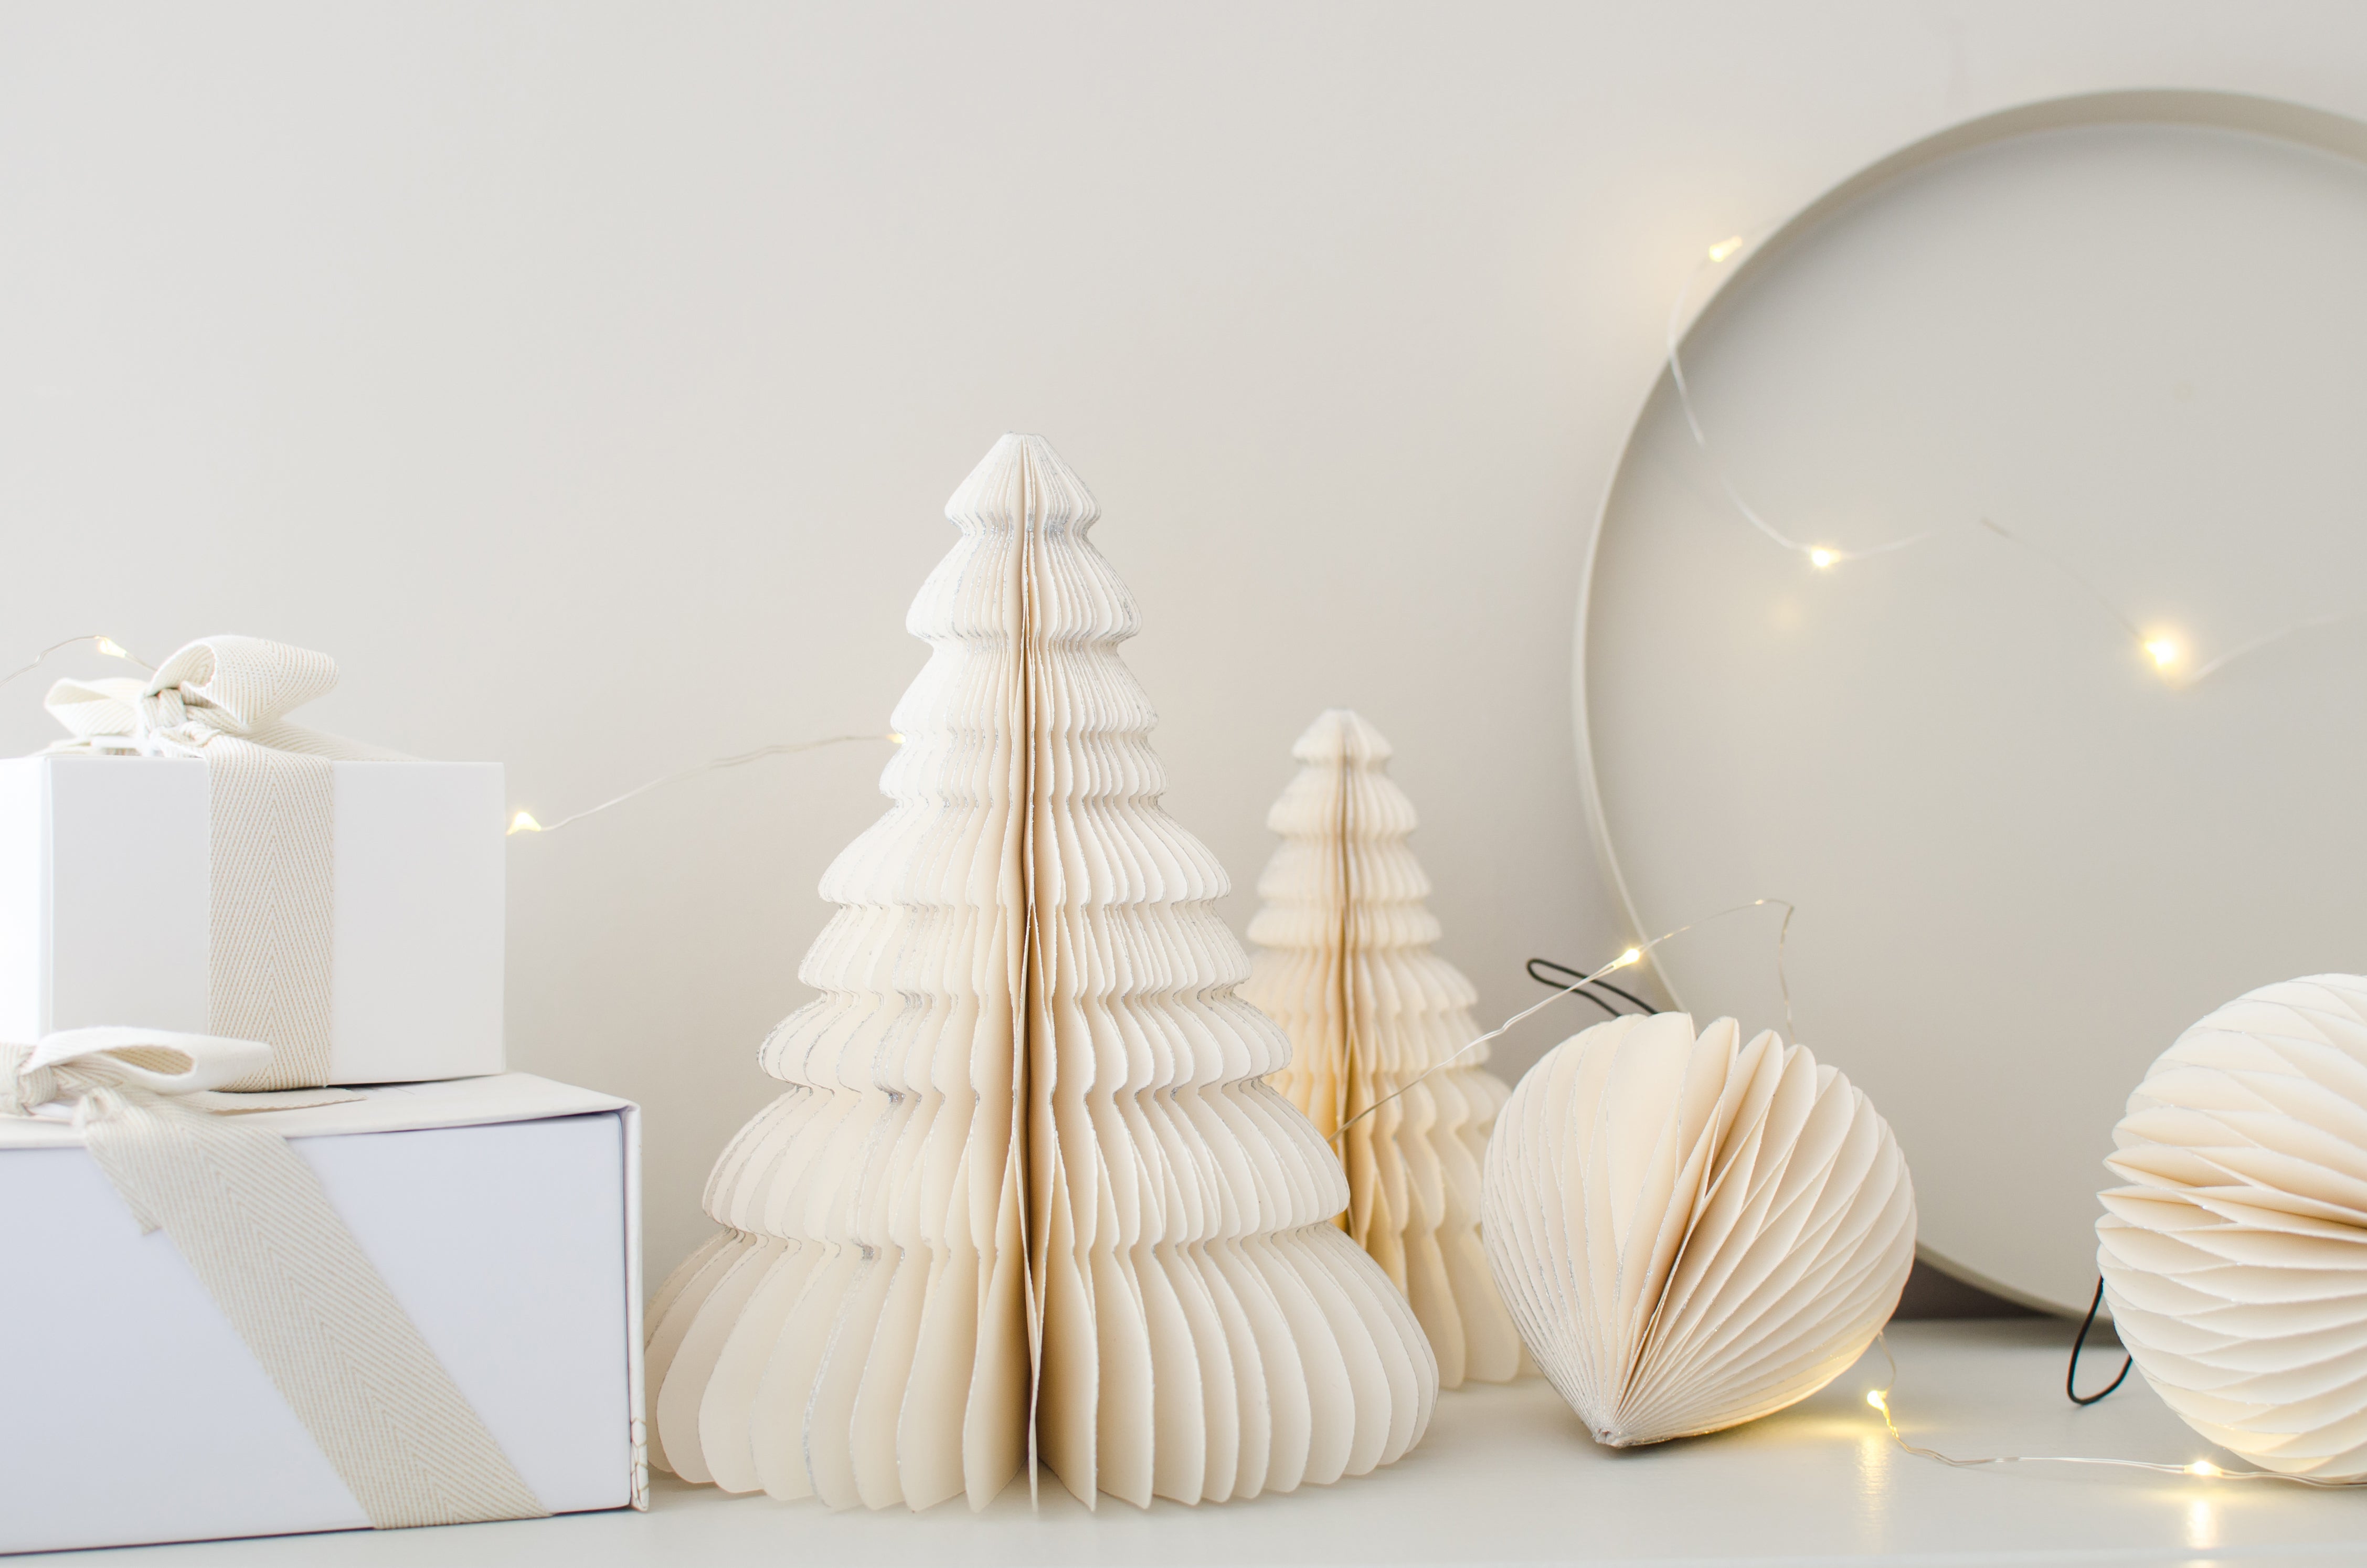 Selection of 2 Off-white Paper Standing Trees, & two hanging paper ornaments in a bauble shape, resting against a white painted wall and table with white gifts boxes and fairy lights